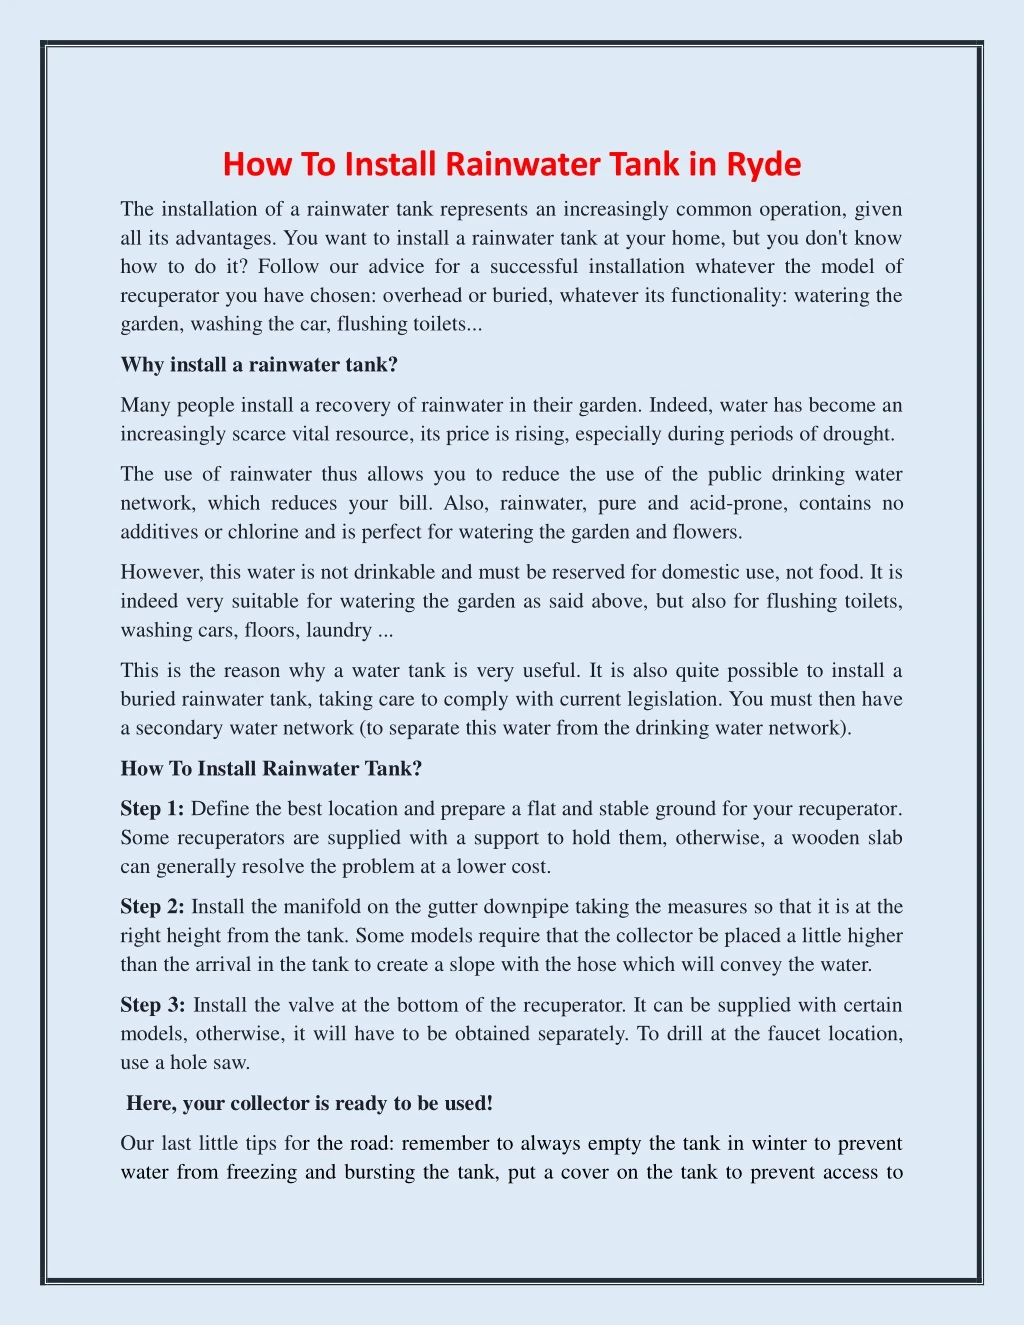 how to install rainwater tank in ryde